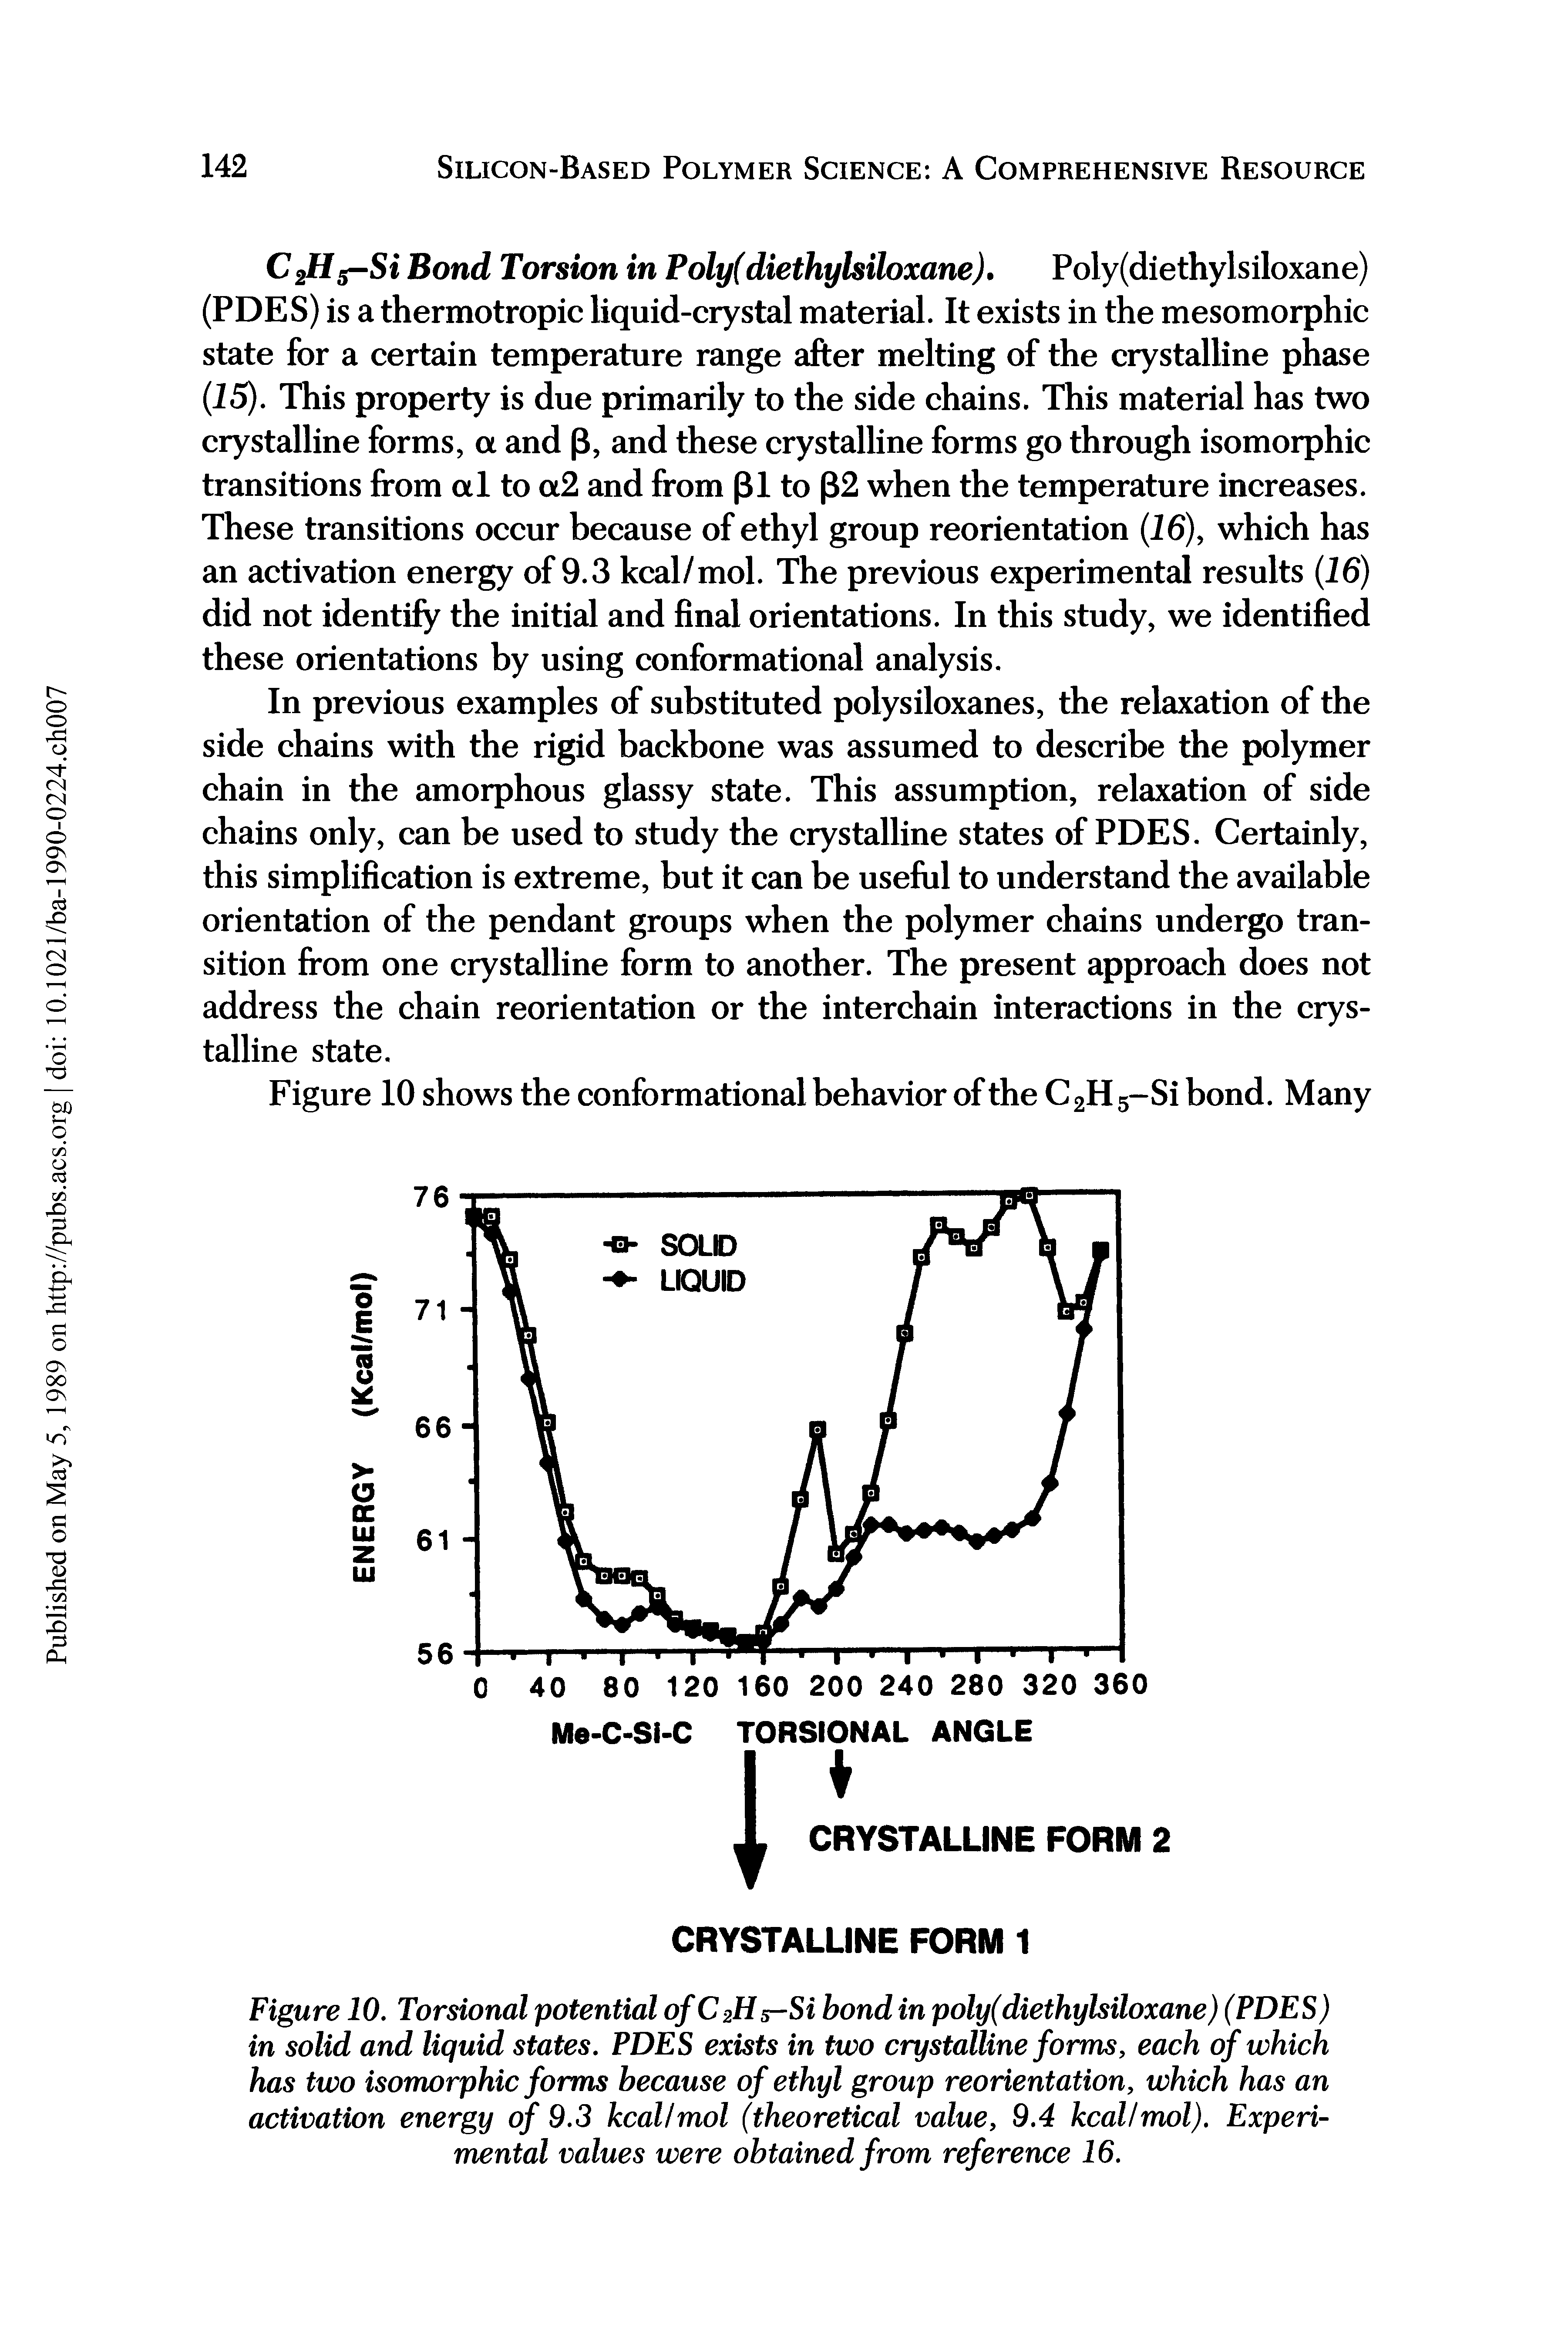 Figure 10. Torsional potential of CzHs-Si bond in poly(diethylsiloxane) (PDES) in solid and liquid states. PDES exists in two crystalline forms, each of which has two isomorphic forms because of ethyl group reorientation, which has an activation energy of 9.3 kcal/mol (theoretical value, 9.4 kcal/mol). Experimental values were obtained from reference 16.